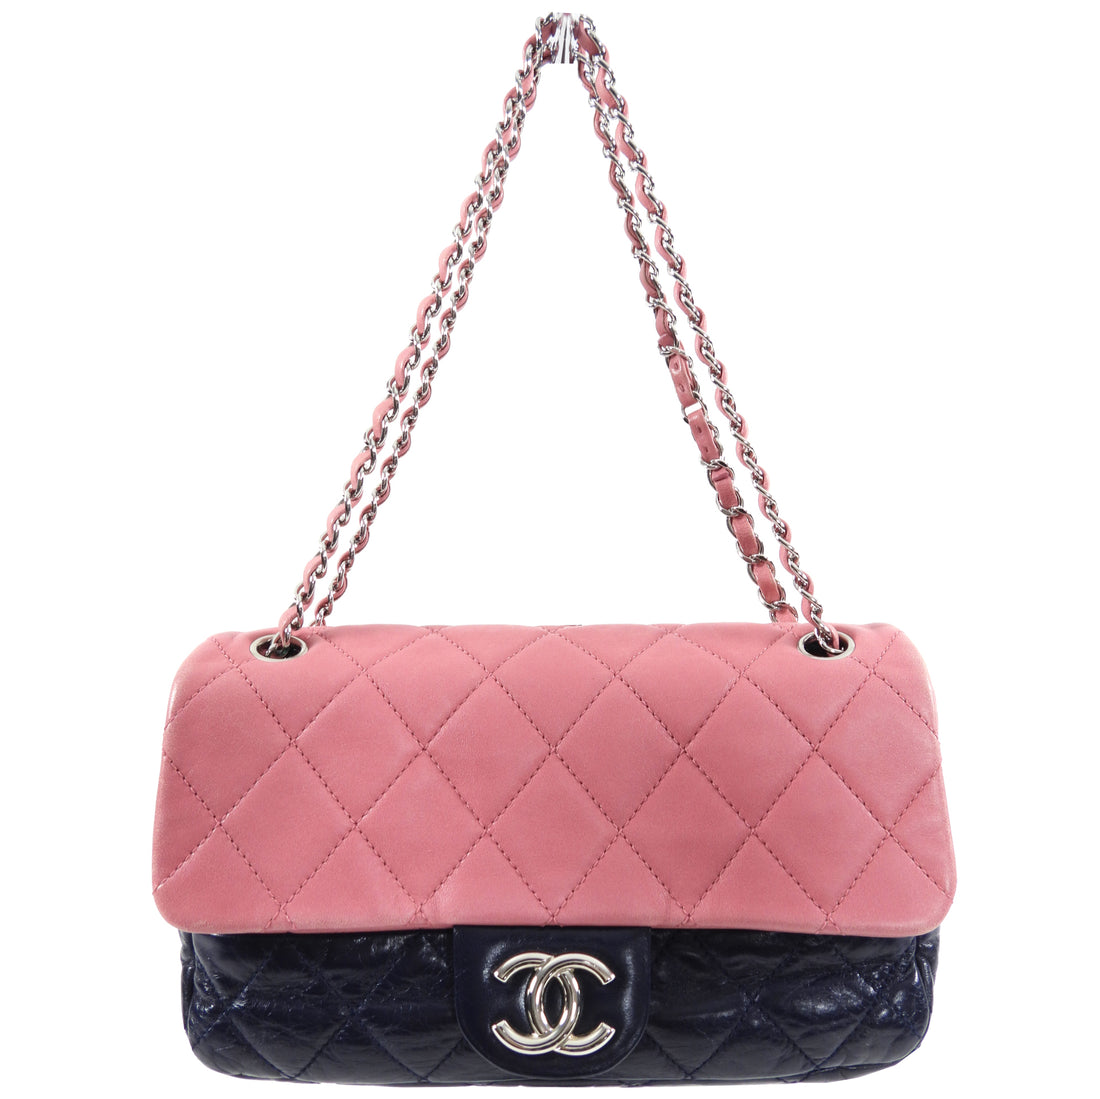 CHANEL Vintage CC Diamond Quilted Tassel Bag  COCOON